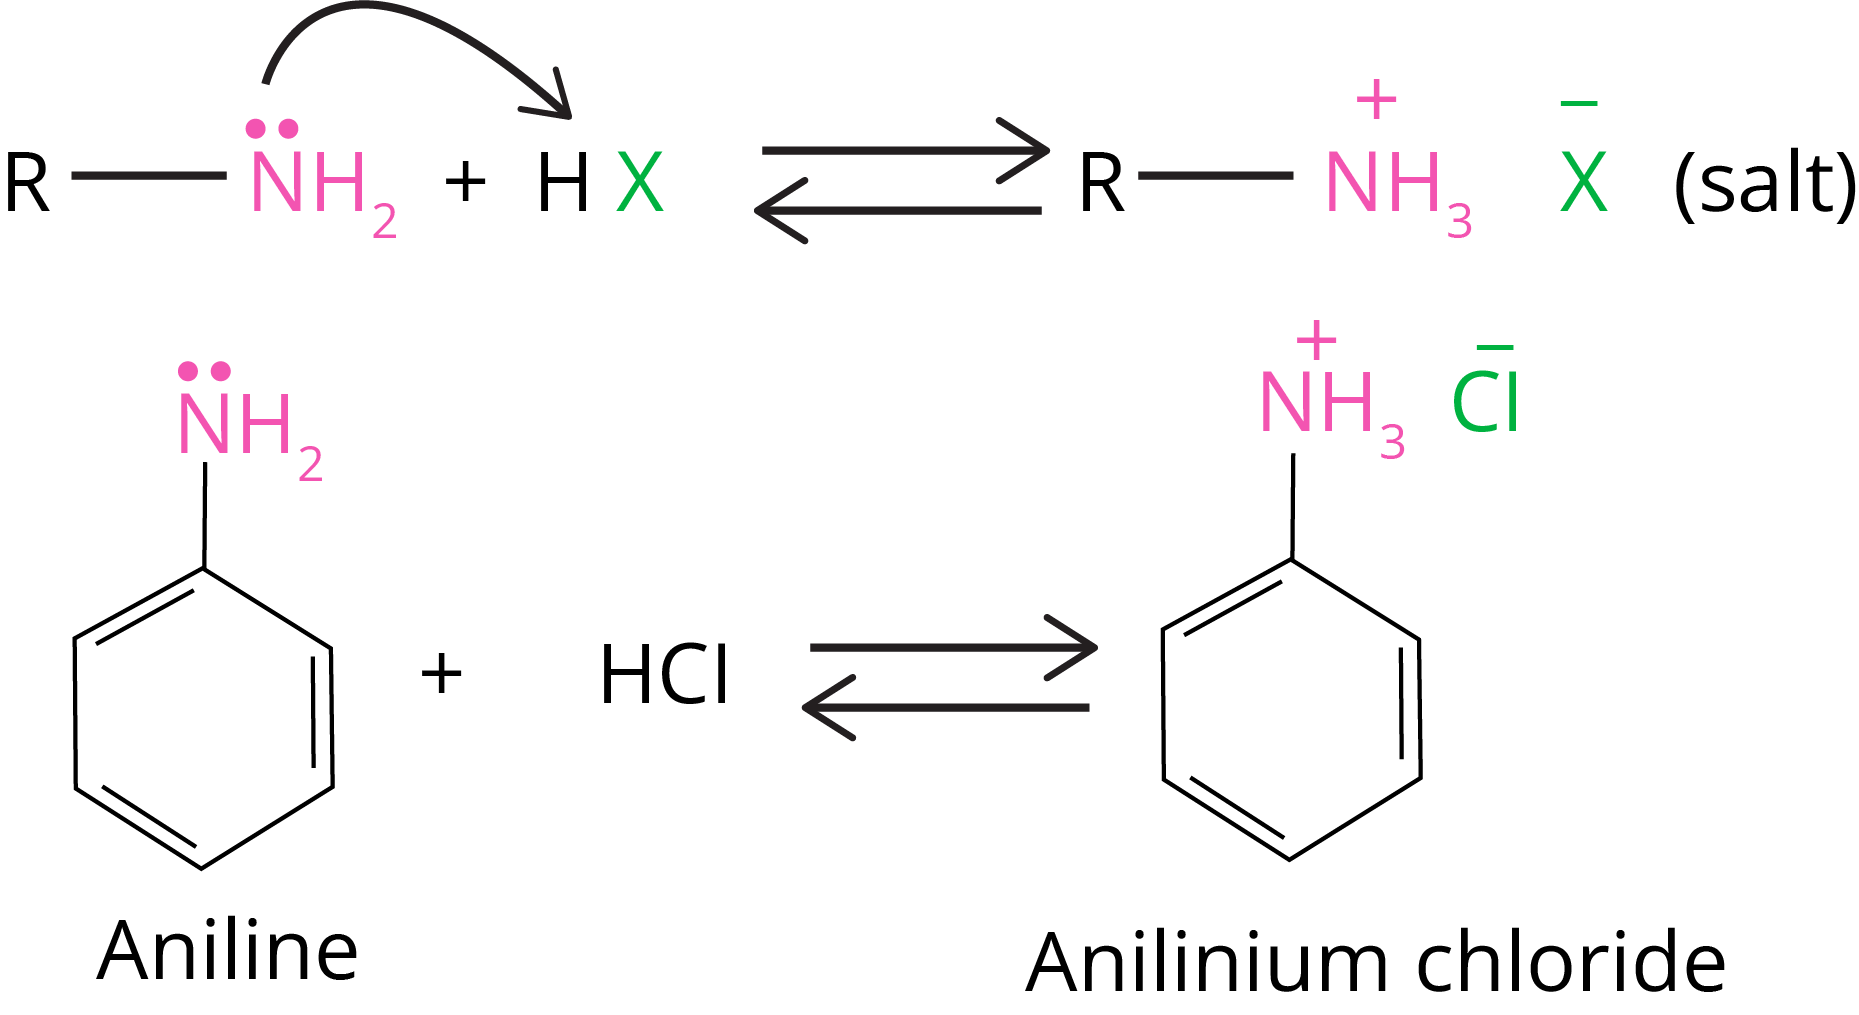 Amine salts regenerate the parent amine when treated with a base such as NaOH.